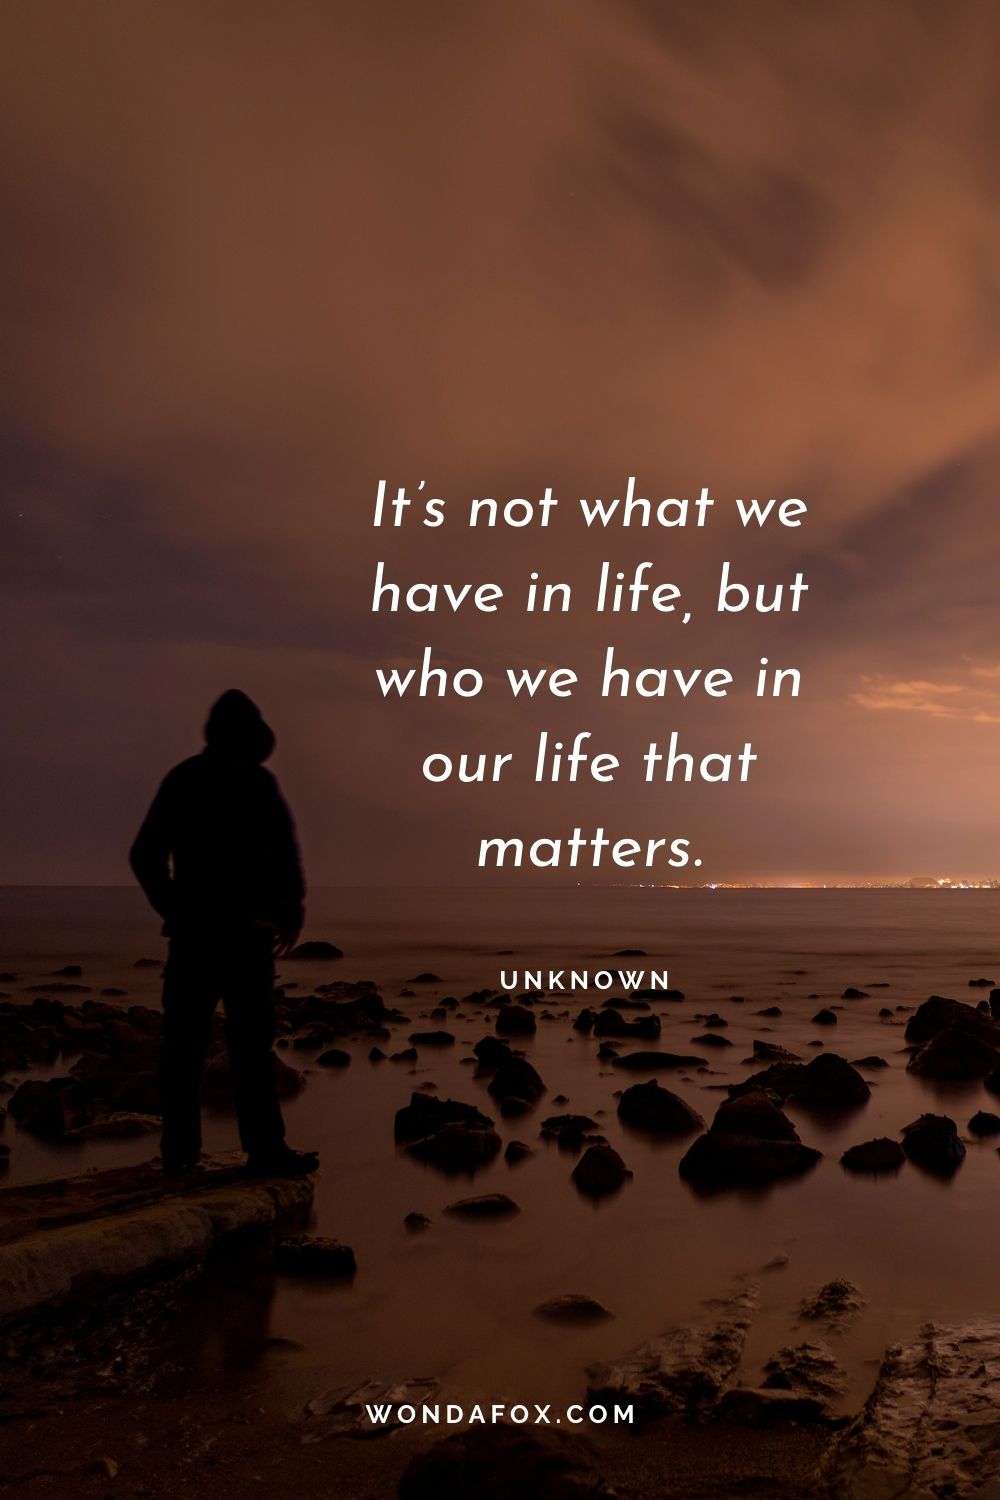 It’s not what we have in life, but who we have in our life that matters.